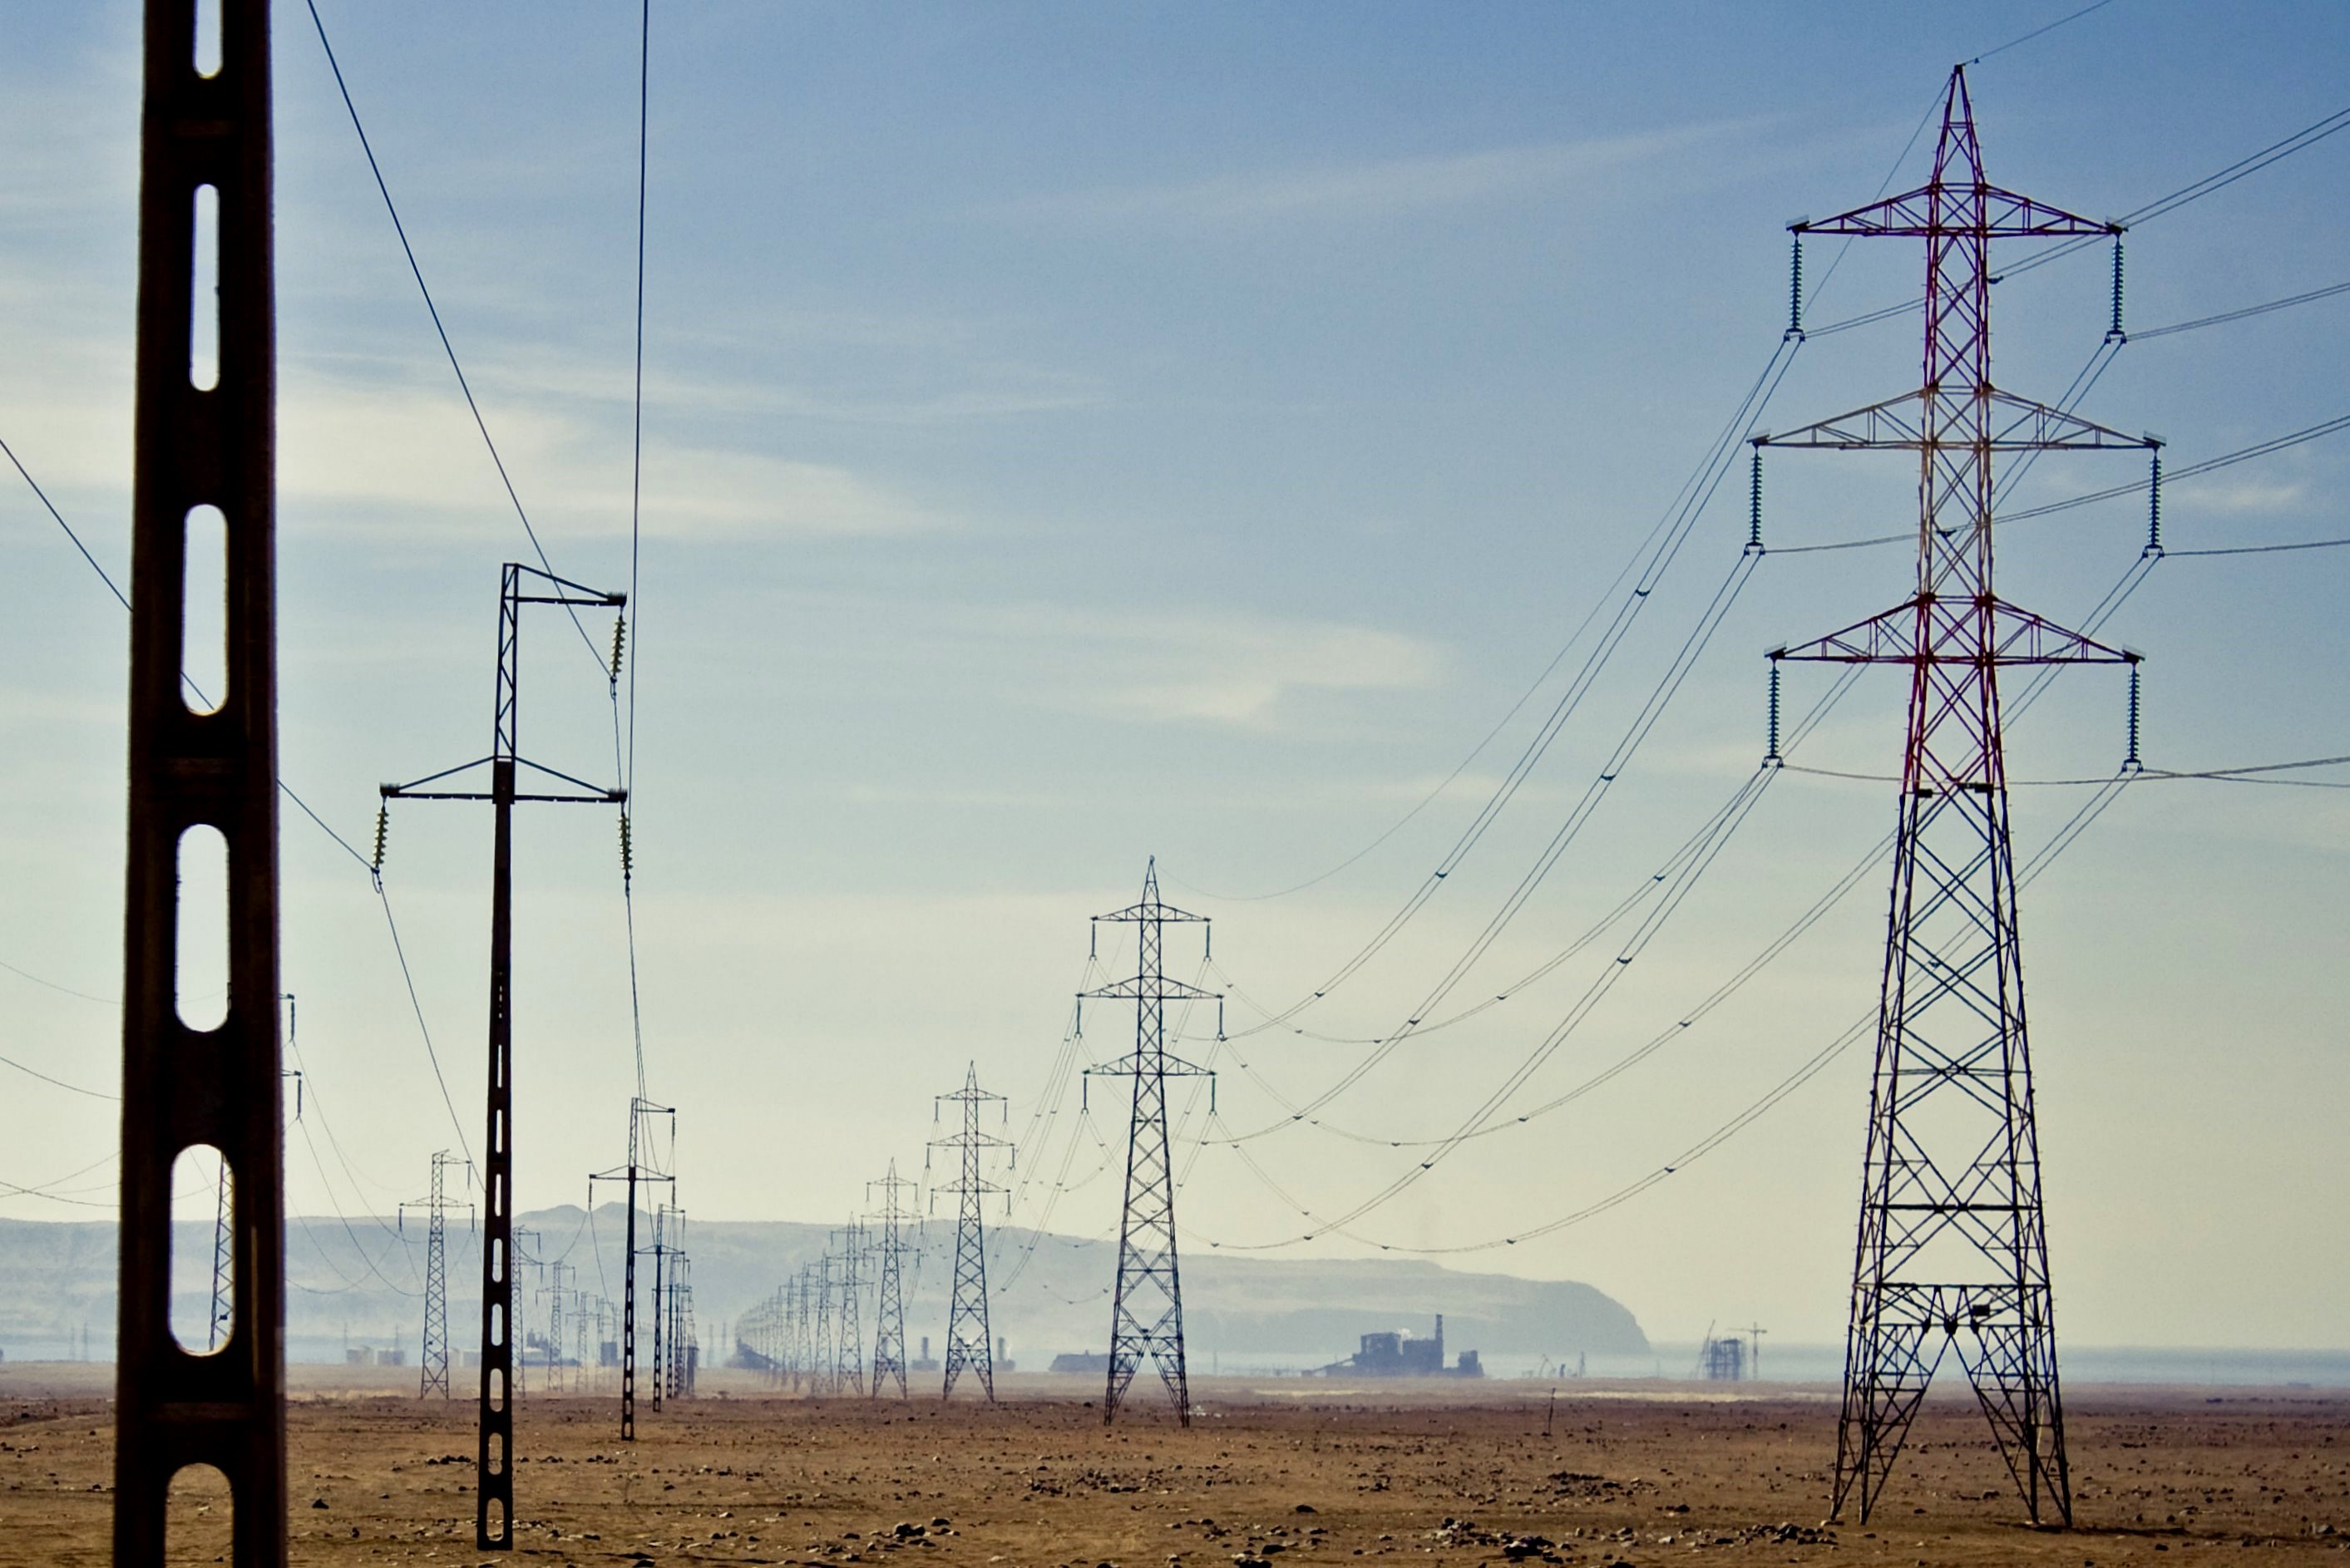 Chile's longest power line could speed up the shift to renewables